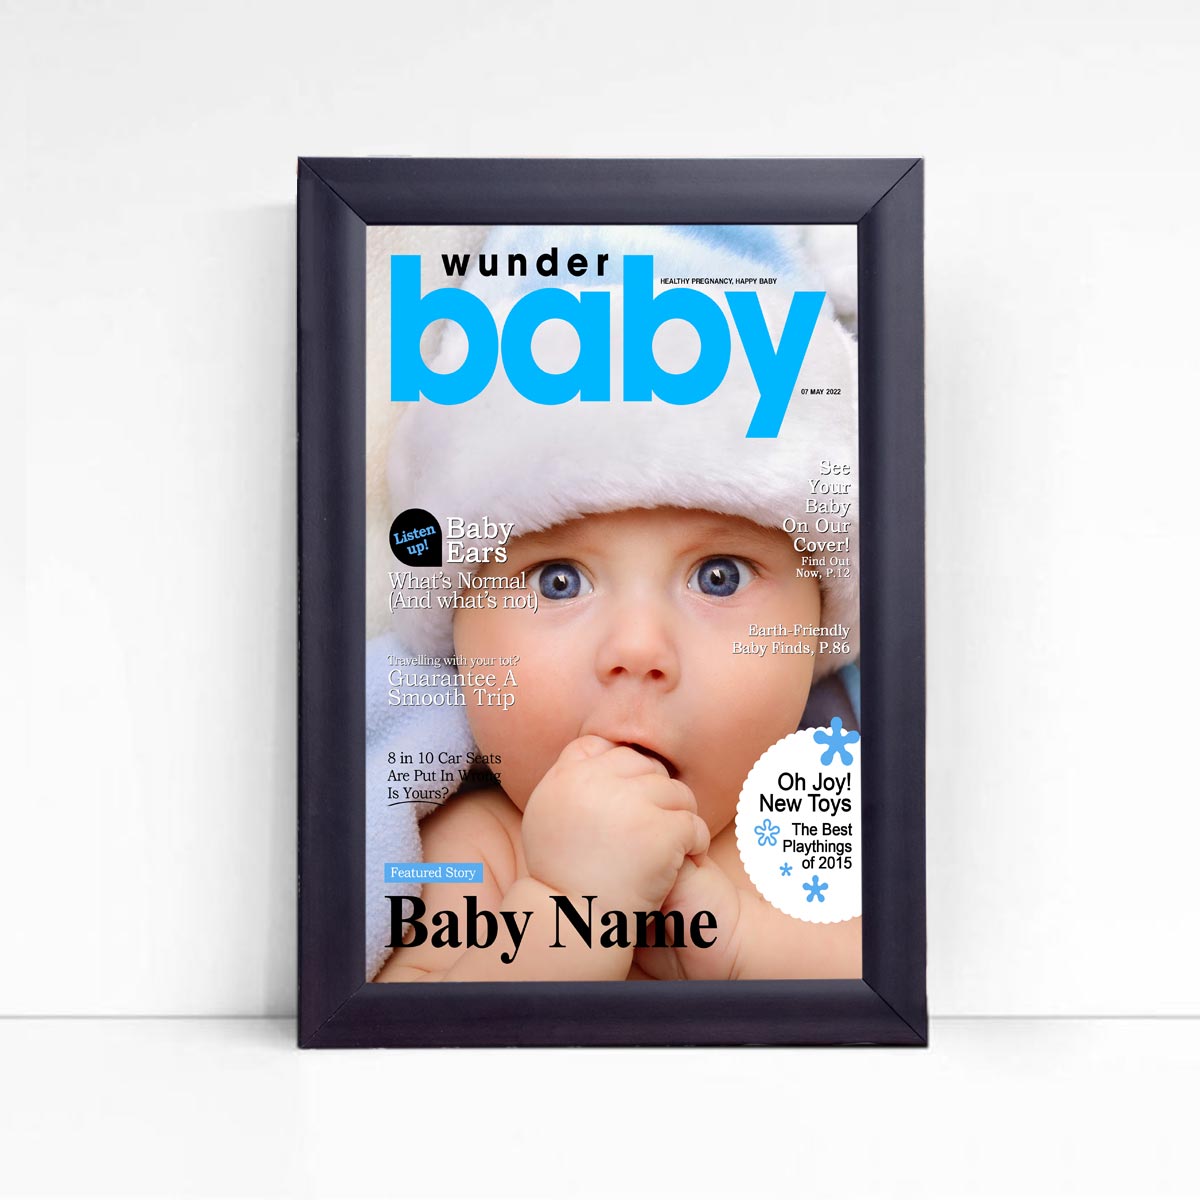 Personalised Our Baby Magazine Cover